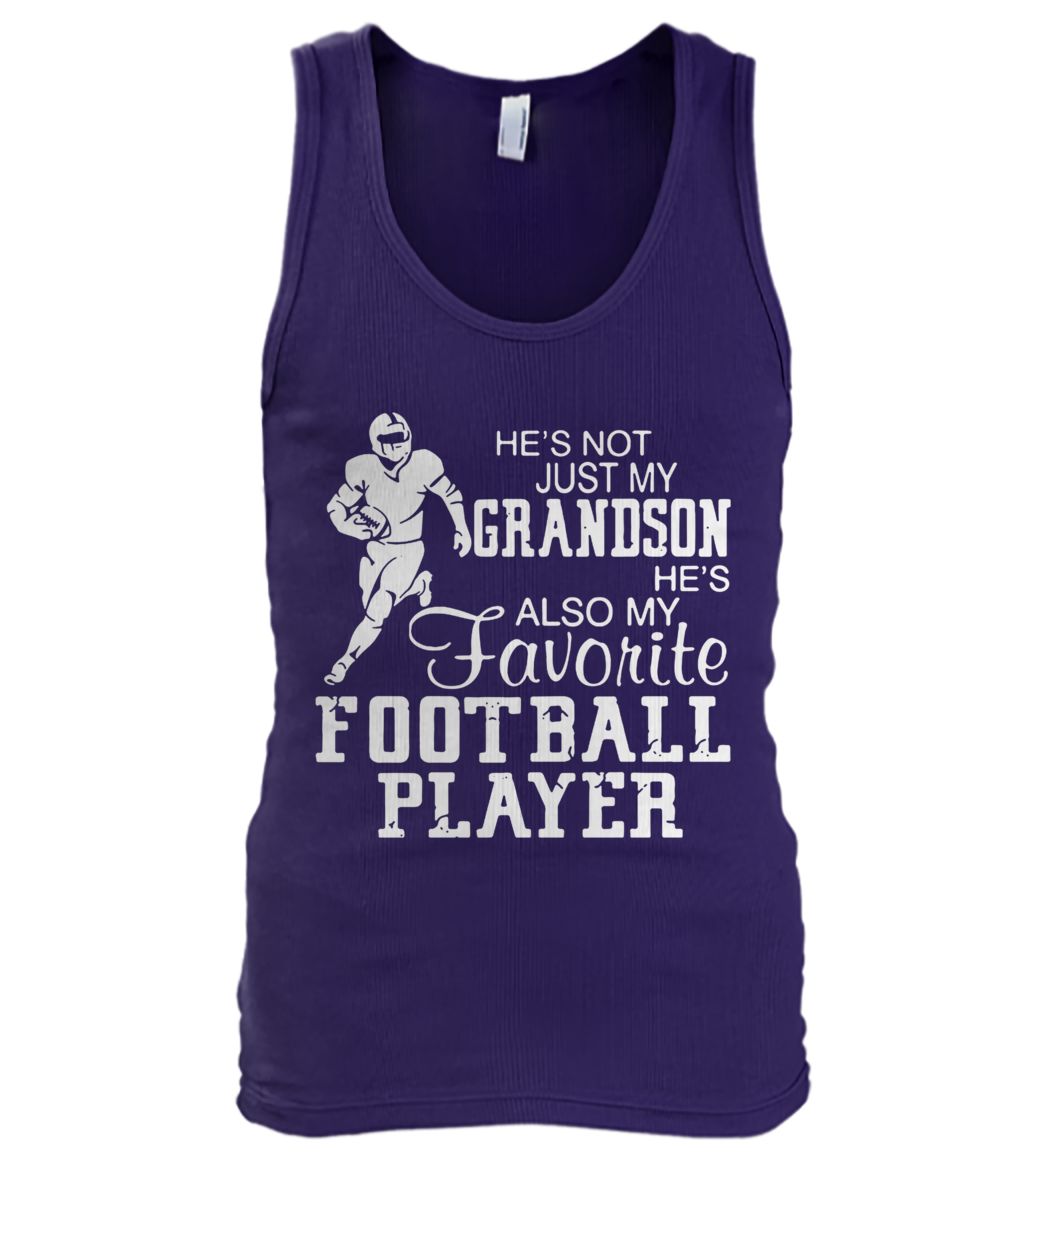 He's not just my grandson he's also my favorite football player men's tank top